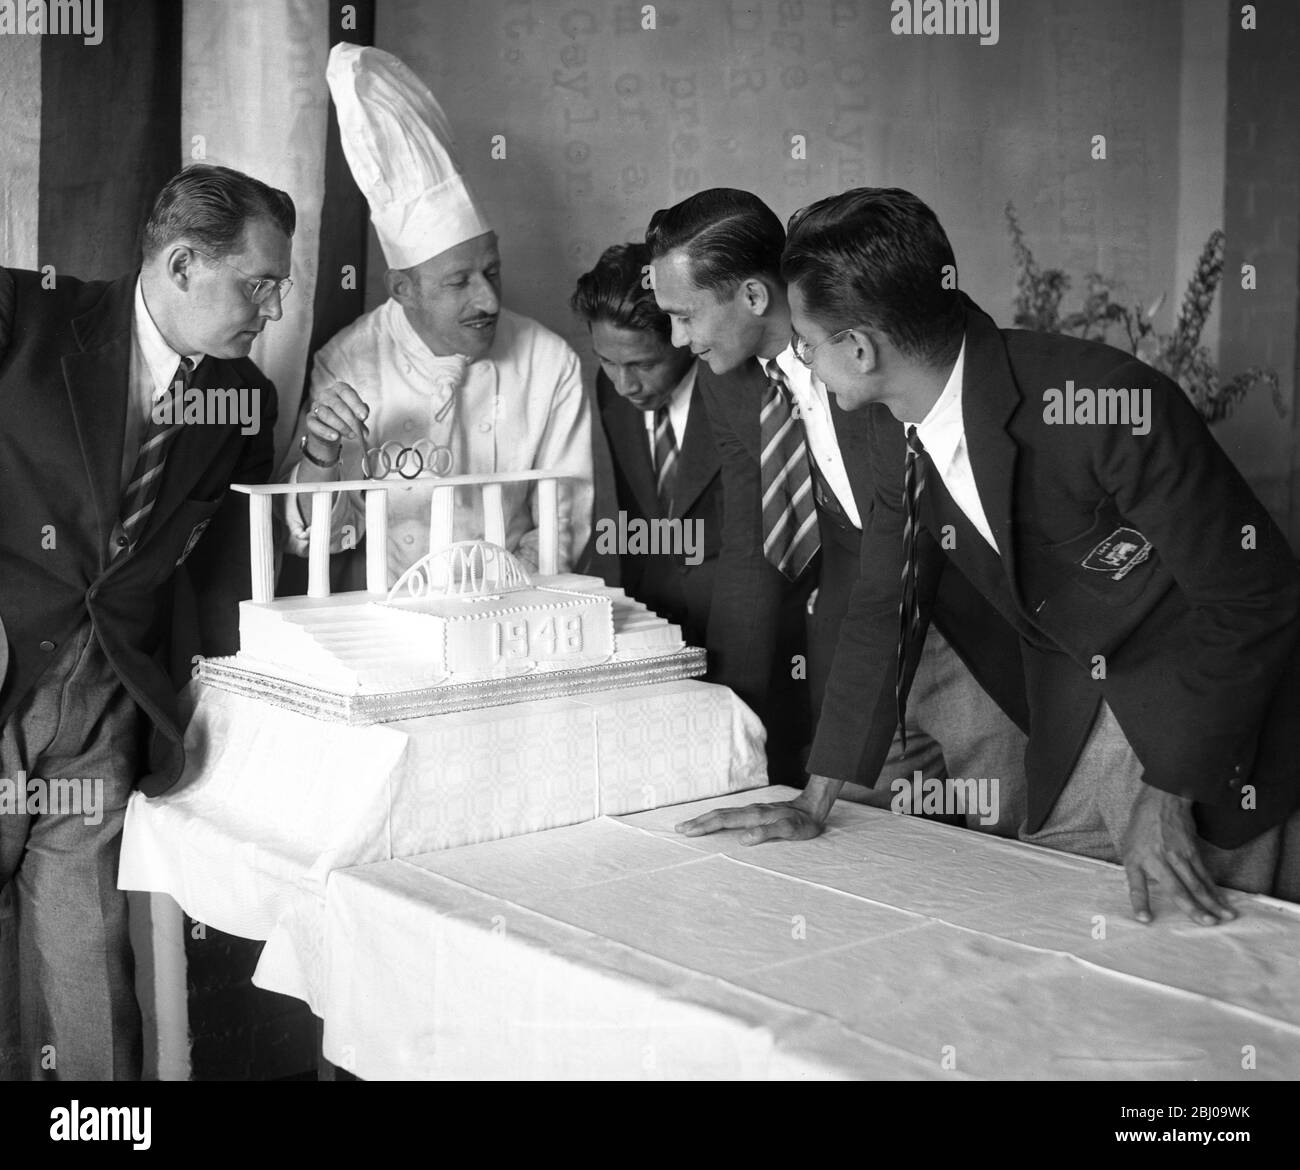 The Olympic Chef Presents ' Greek Theatre ' Cake to Ceylon Olympic Representatives - - When members of the Ceylon Olympic team moved into the Olympic Village at the Richmond , Surry , today Mr John Weier , the Olympic chef de cuisine at the camp , presented them with a cake made in the form of a Greek theatre . As soon as all the Ceylon competitors arrive the cake will be cut . - The chef and Ceylon Olympic members admiring the Olympiad 1948 cake at Richmond , Surrey today . Left to right , Mr Brant Little ( Ceylon Team Coach ) , Mr John Weider ( Olympic Chef De Cuisine ) Mr G . D Peiris ( lon Stock Photo